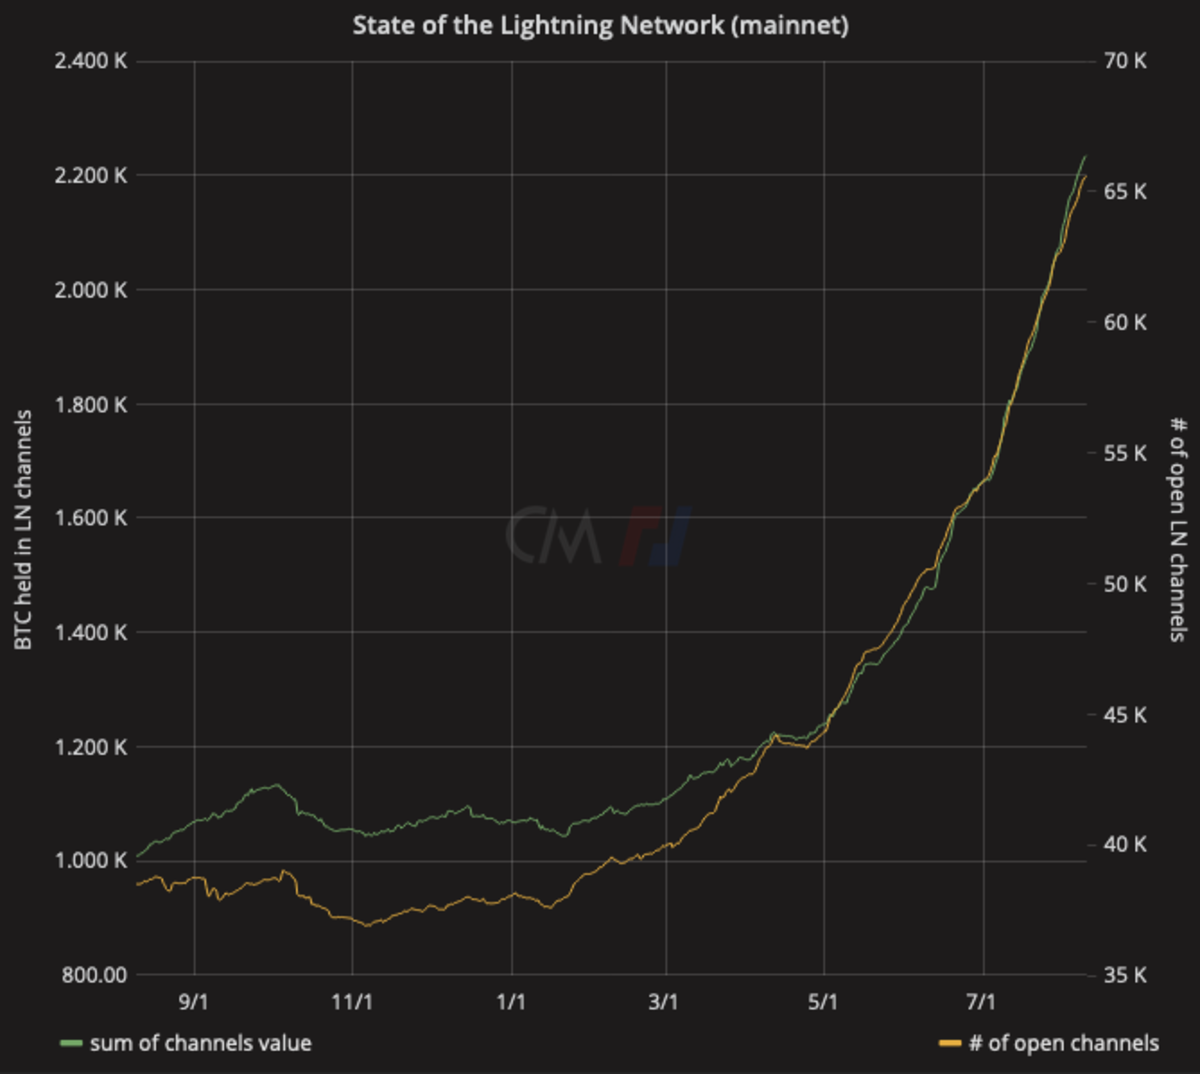 A one-year window of the state of the Lightning Network by Bitmex Research.